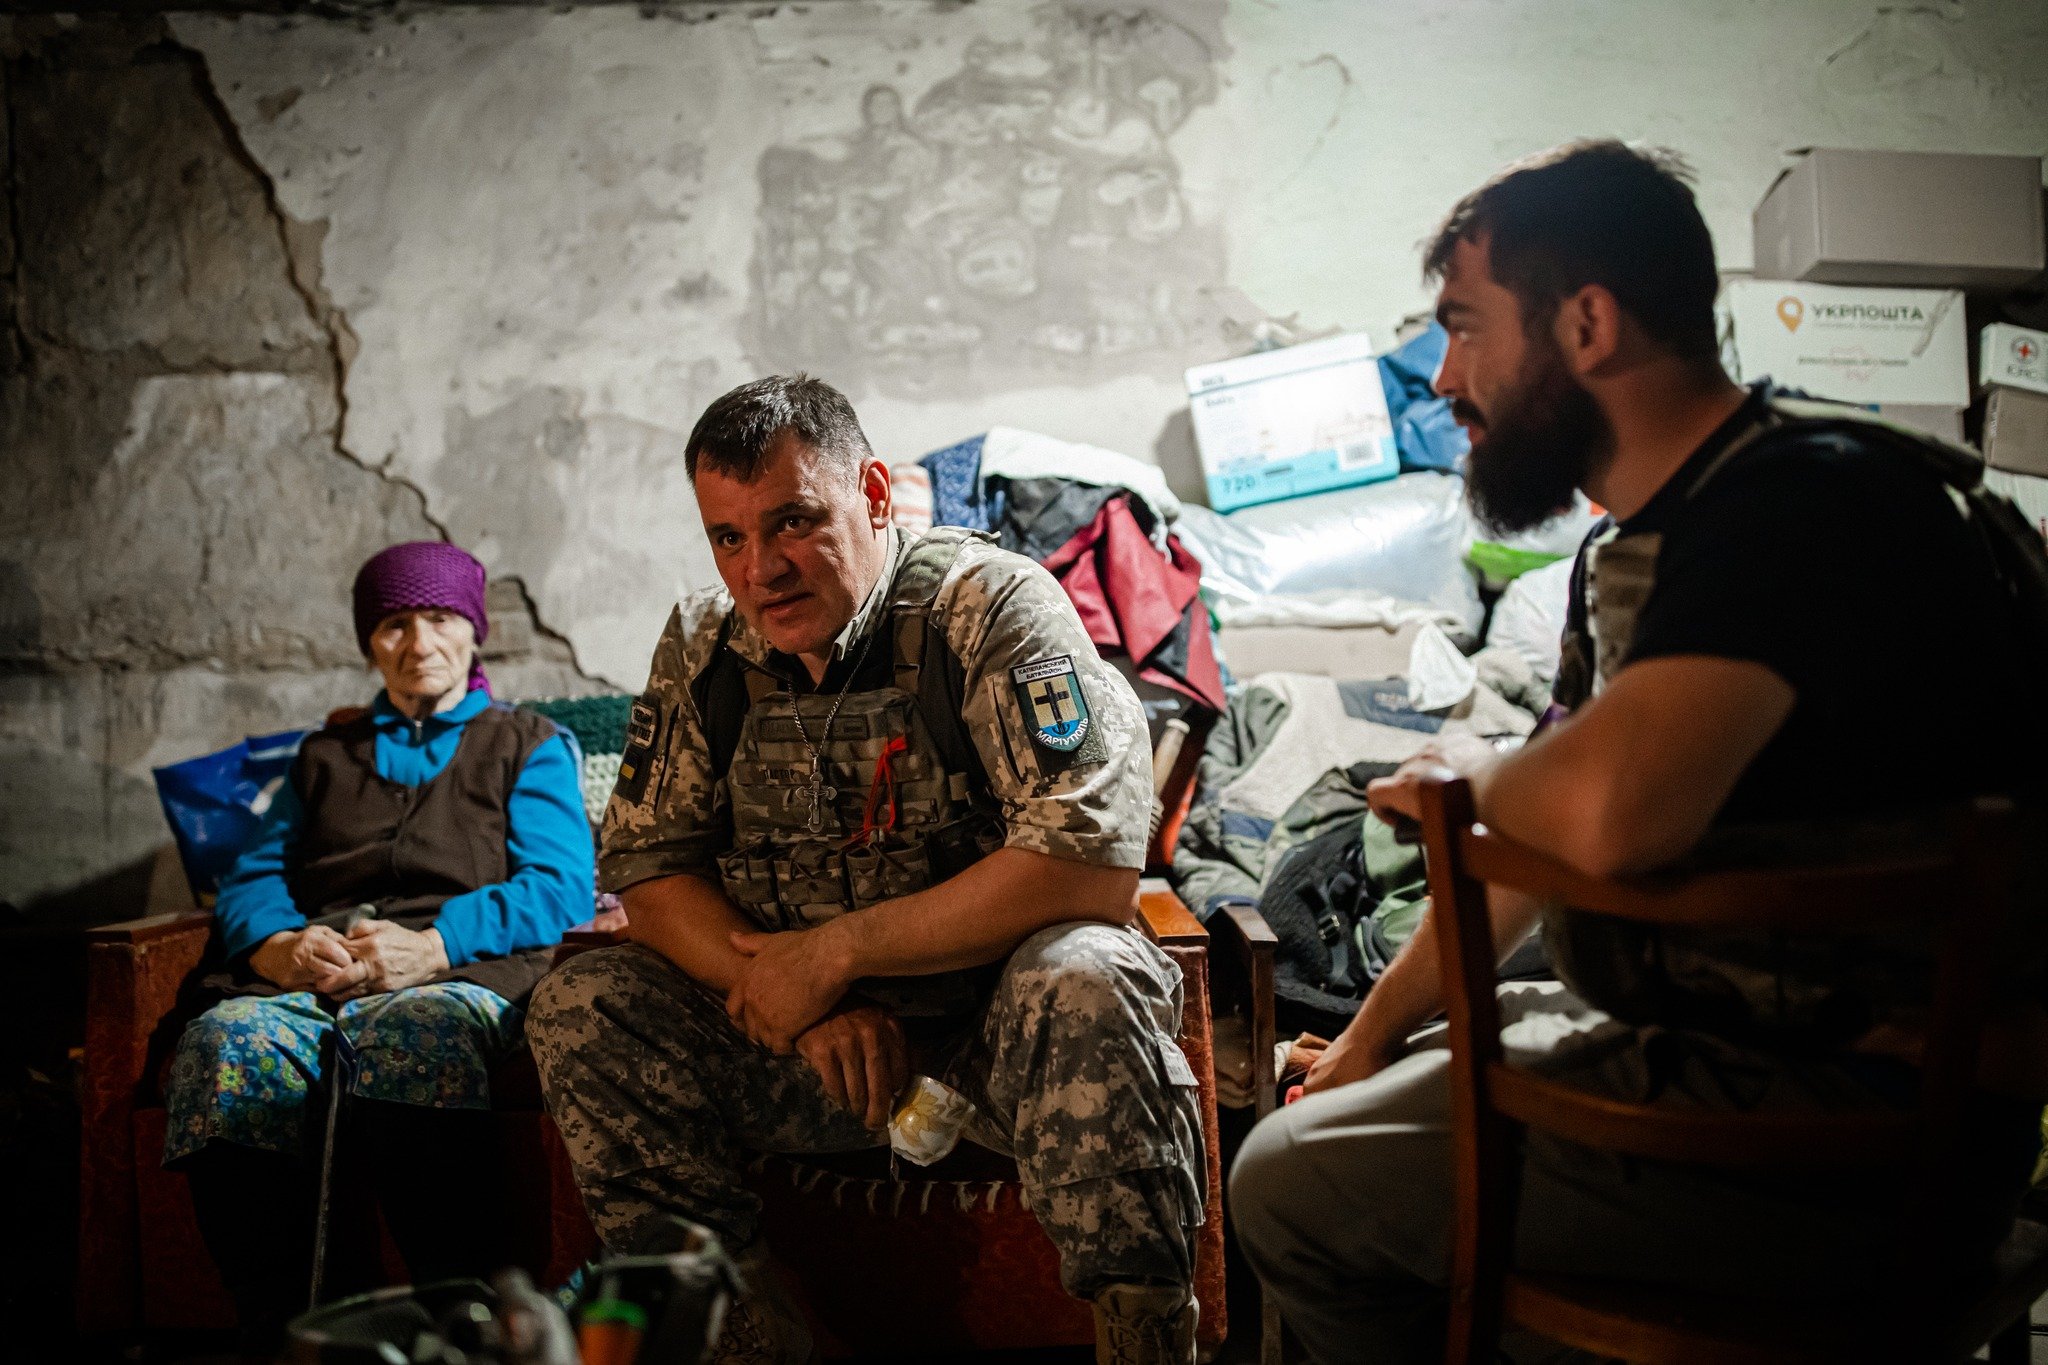 After leaving occupied Donbas, chaplain Gennadiy Mokhnenko became an active volunteer assisting the military.